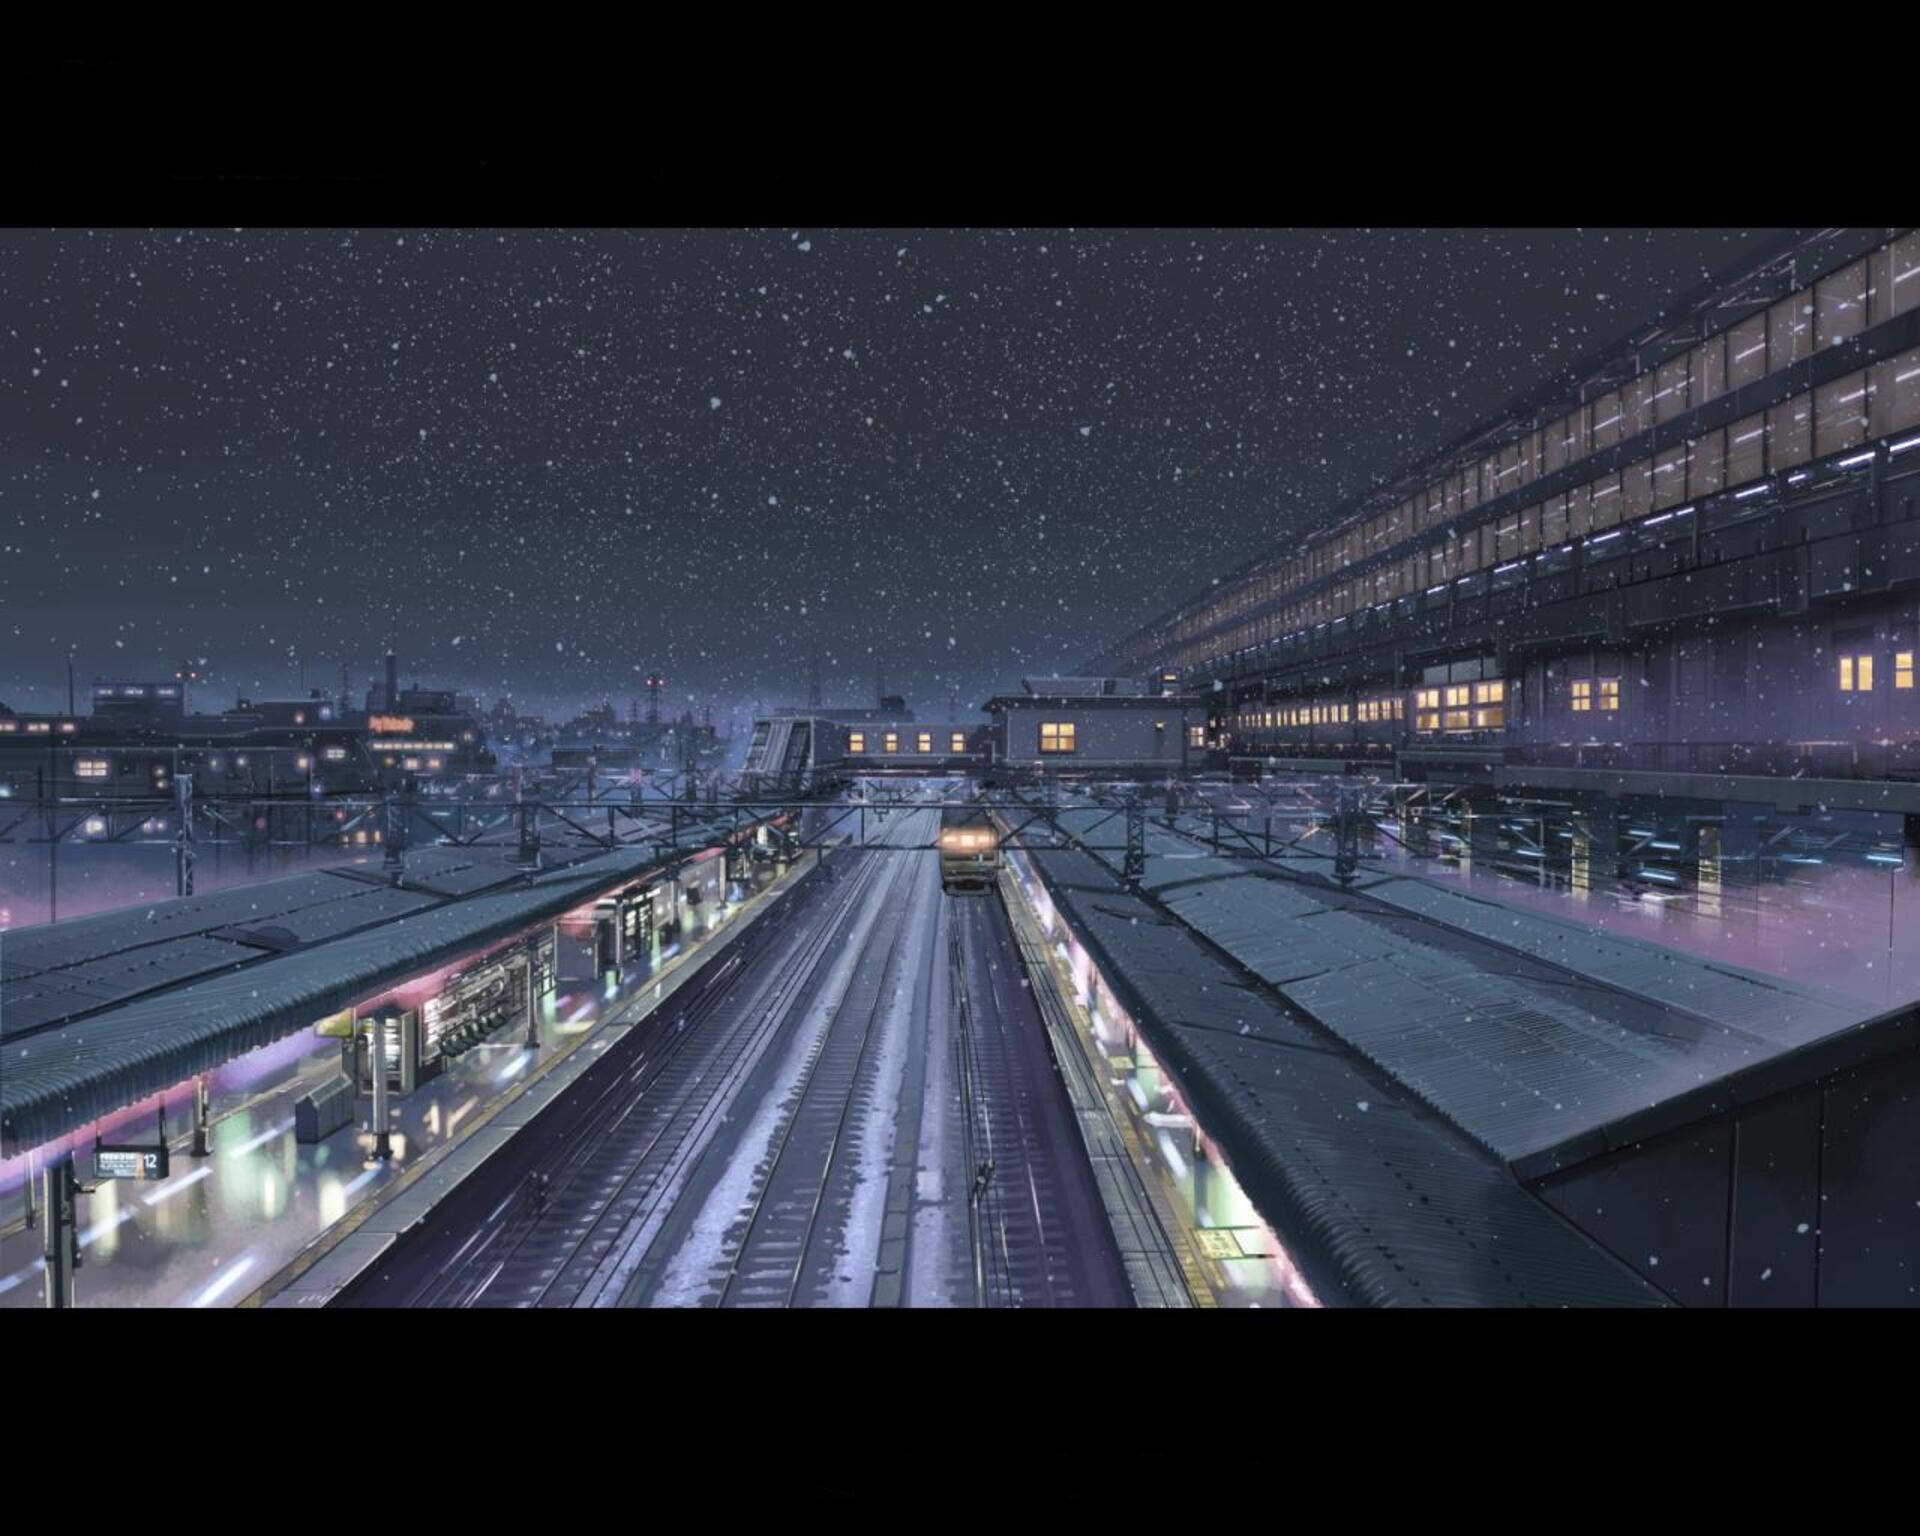 5 Centimeters Per Second Chilly Night Background